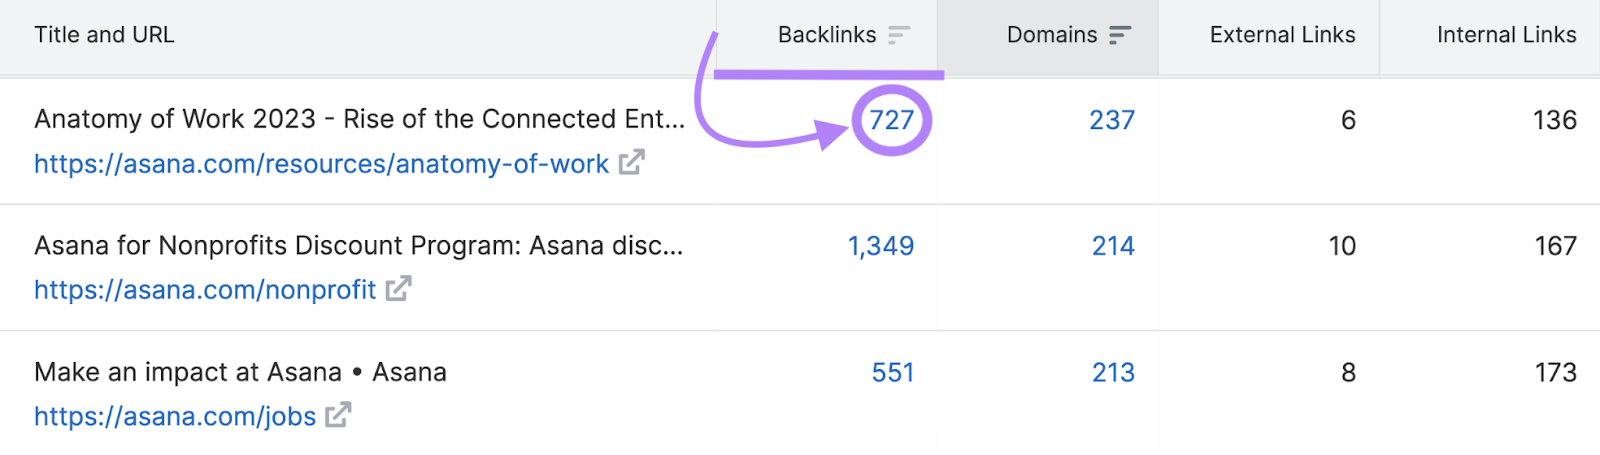 "727" highlighted under "Backlinks" column for "Anatomy of Work 2023" page